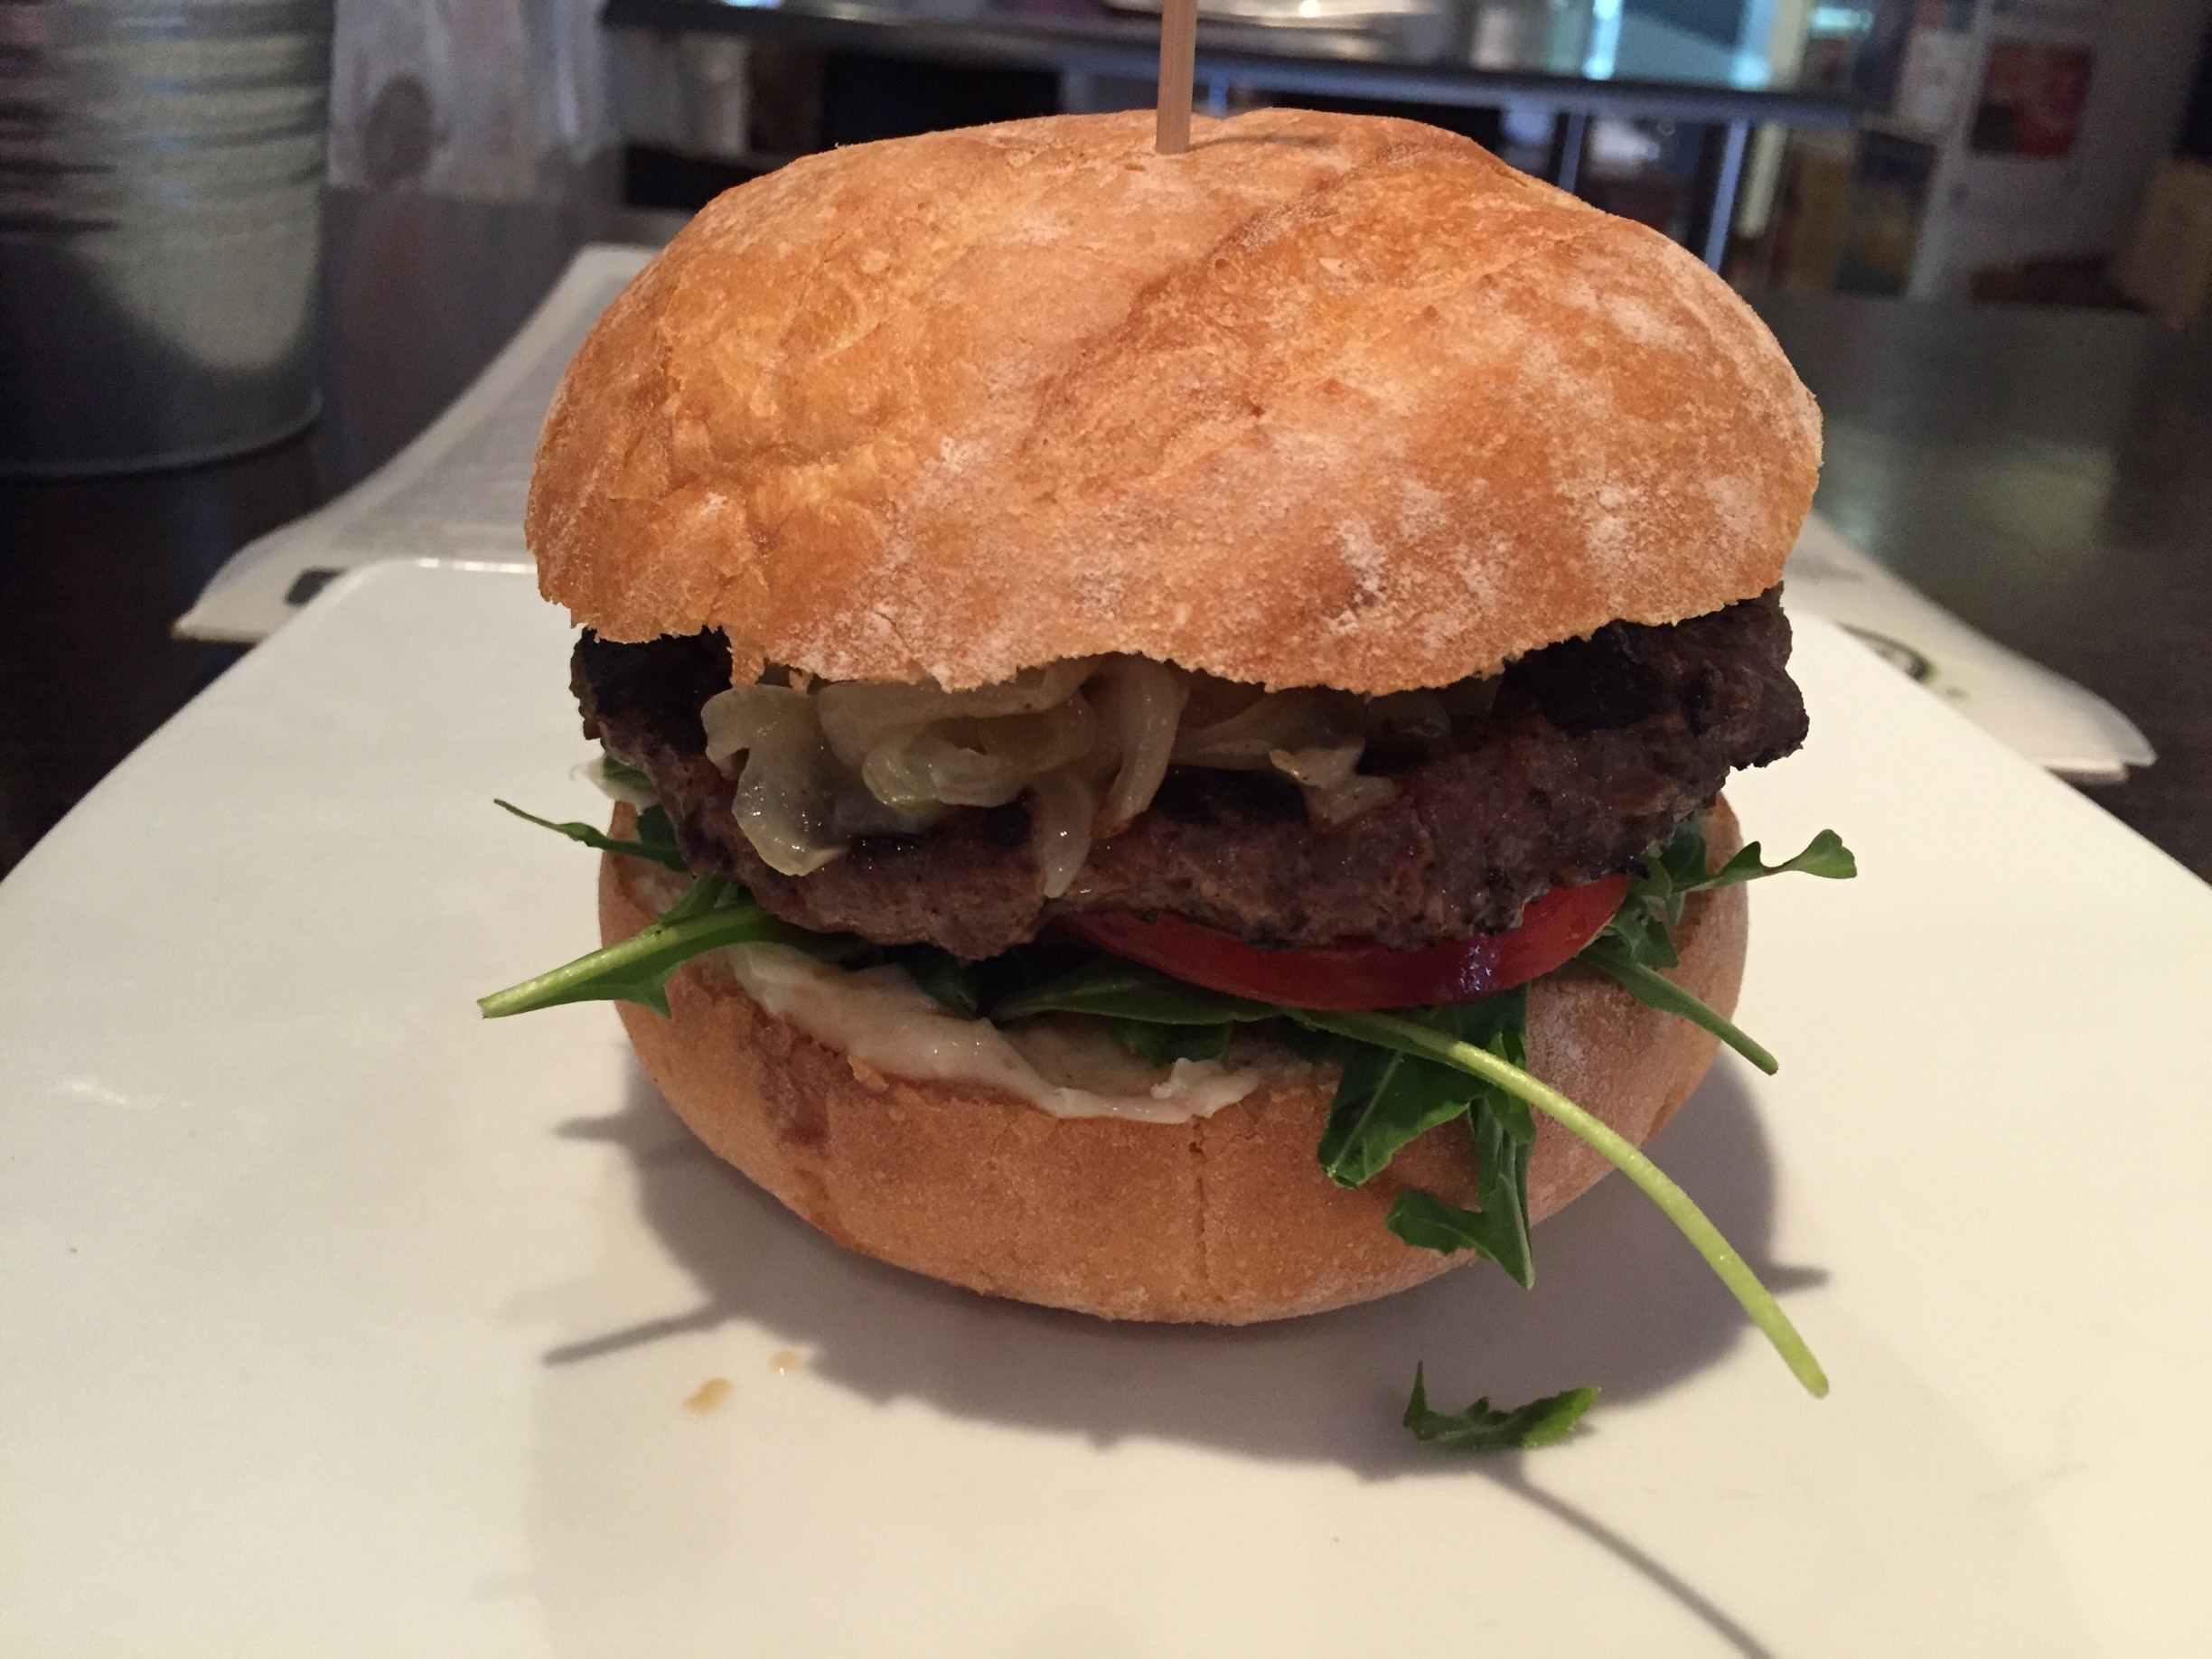 My first time trying a kangaroo burger. Served with caramelized onions, greens, tomatoes, and beetroot relish. Pretty good.